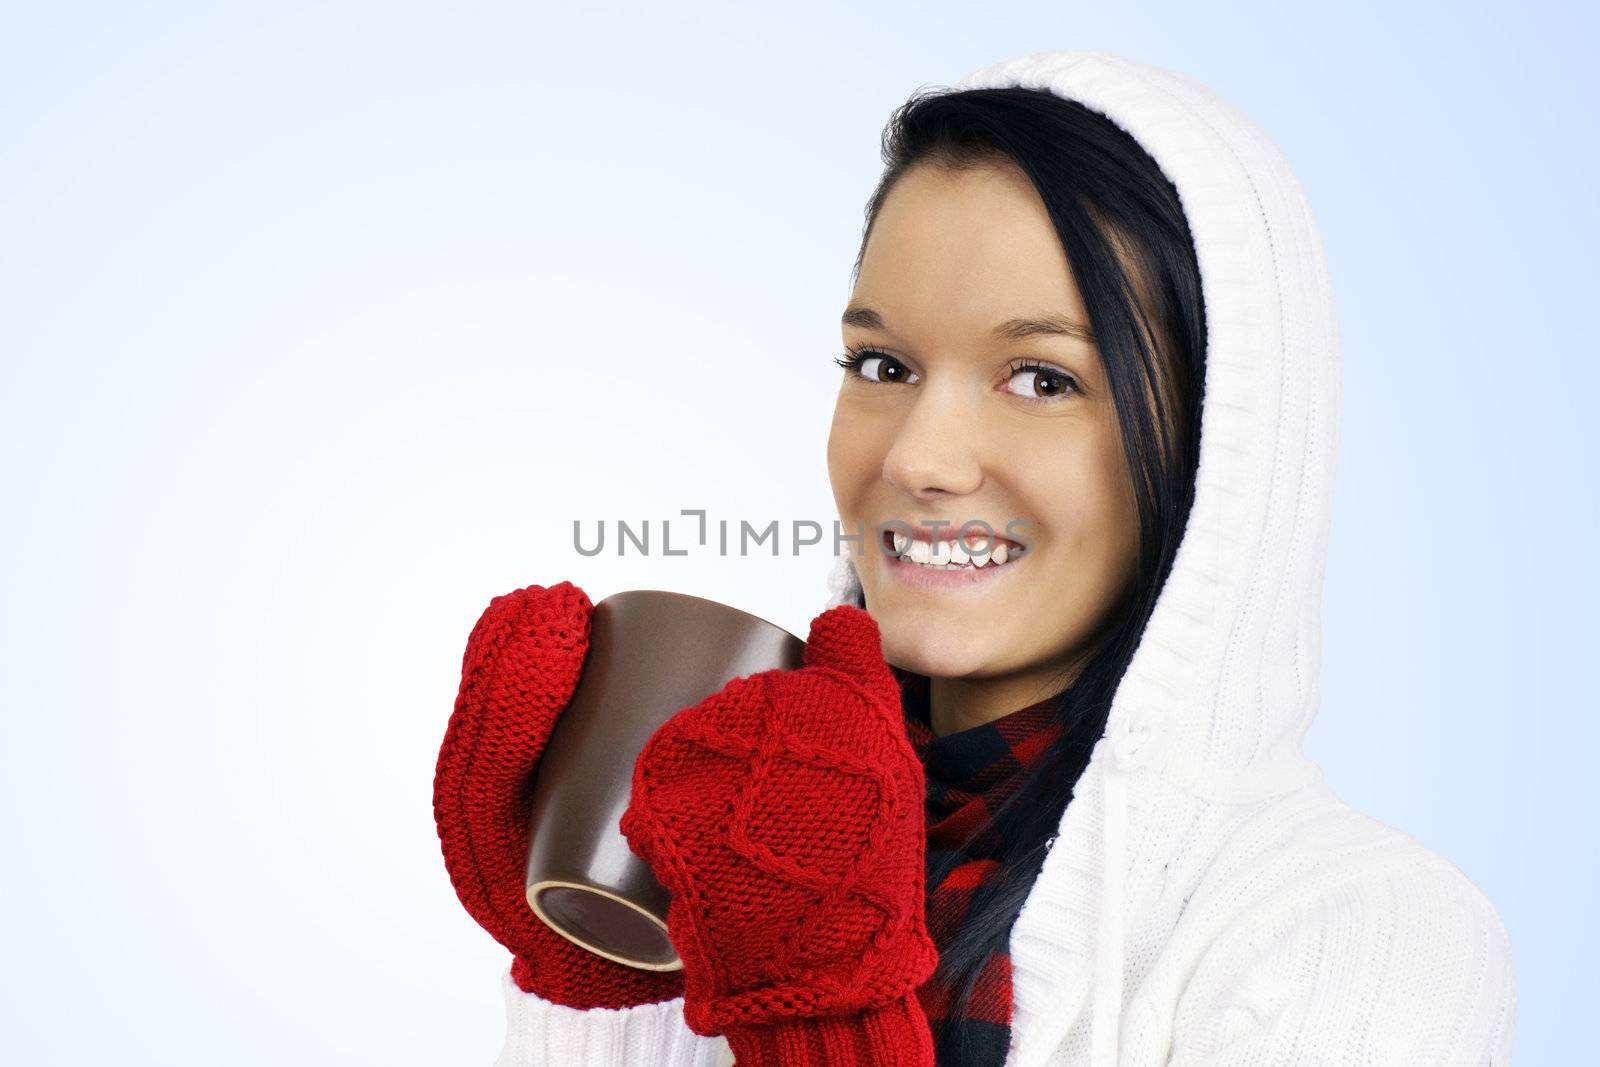 Winter time concept: cute smiling friendly natural young woman with red mittens and white hoodie drinking hot chocolate, coffee or tea in a brown mug over light blue gradient background.